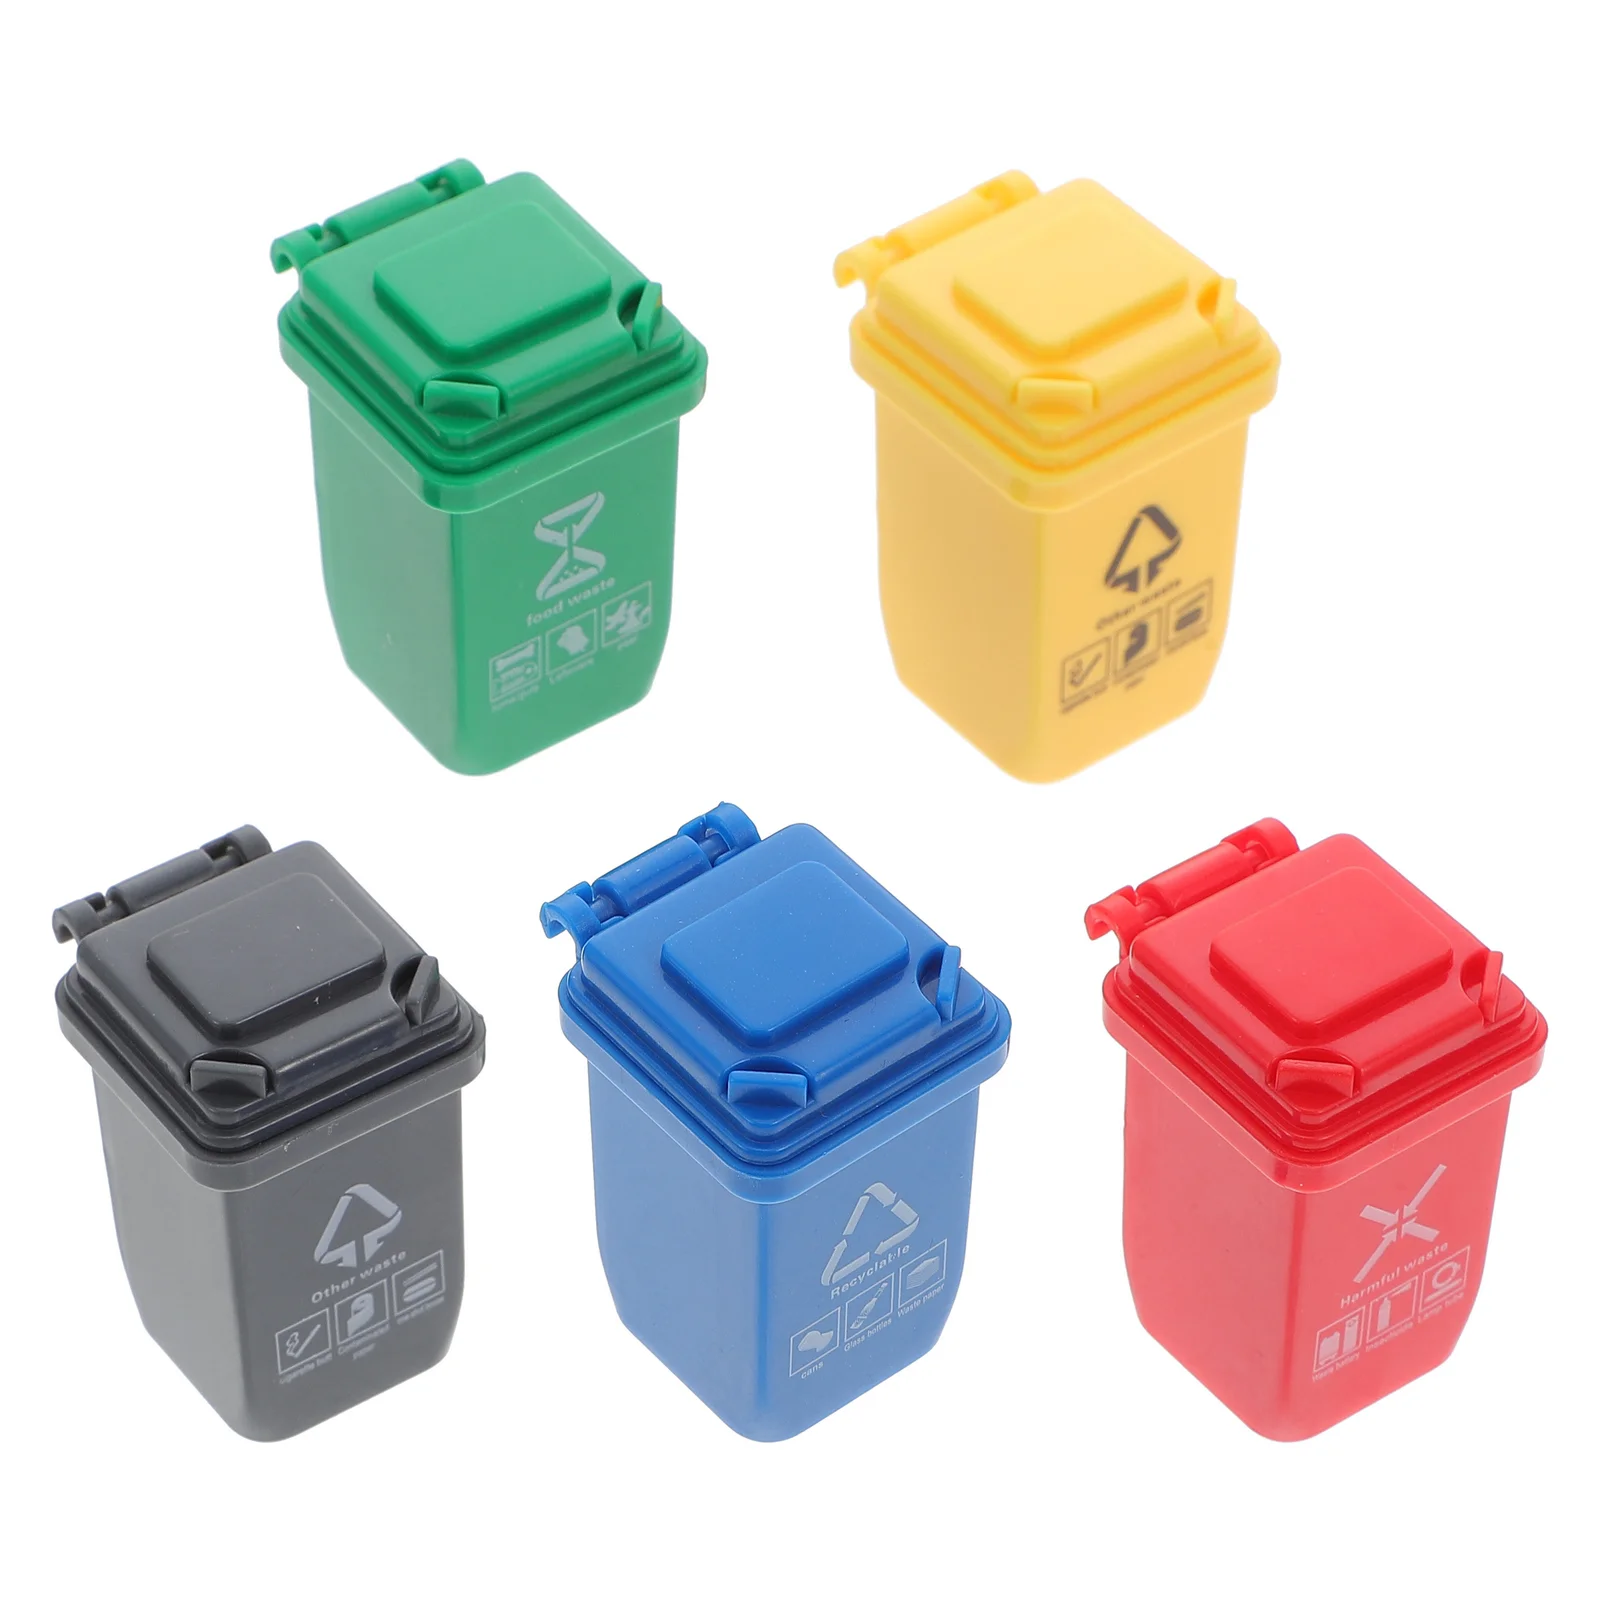 Tiny Trash Can Vehicle Garbage Bin Small Trash Can Miniature Trash Can Garbage Pail Model Miniature Scene Model 1 64 parking lot mat model car vehicle scene display large garage toy mouse pad scene show table mouse pad